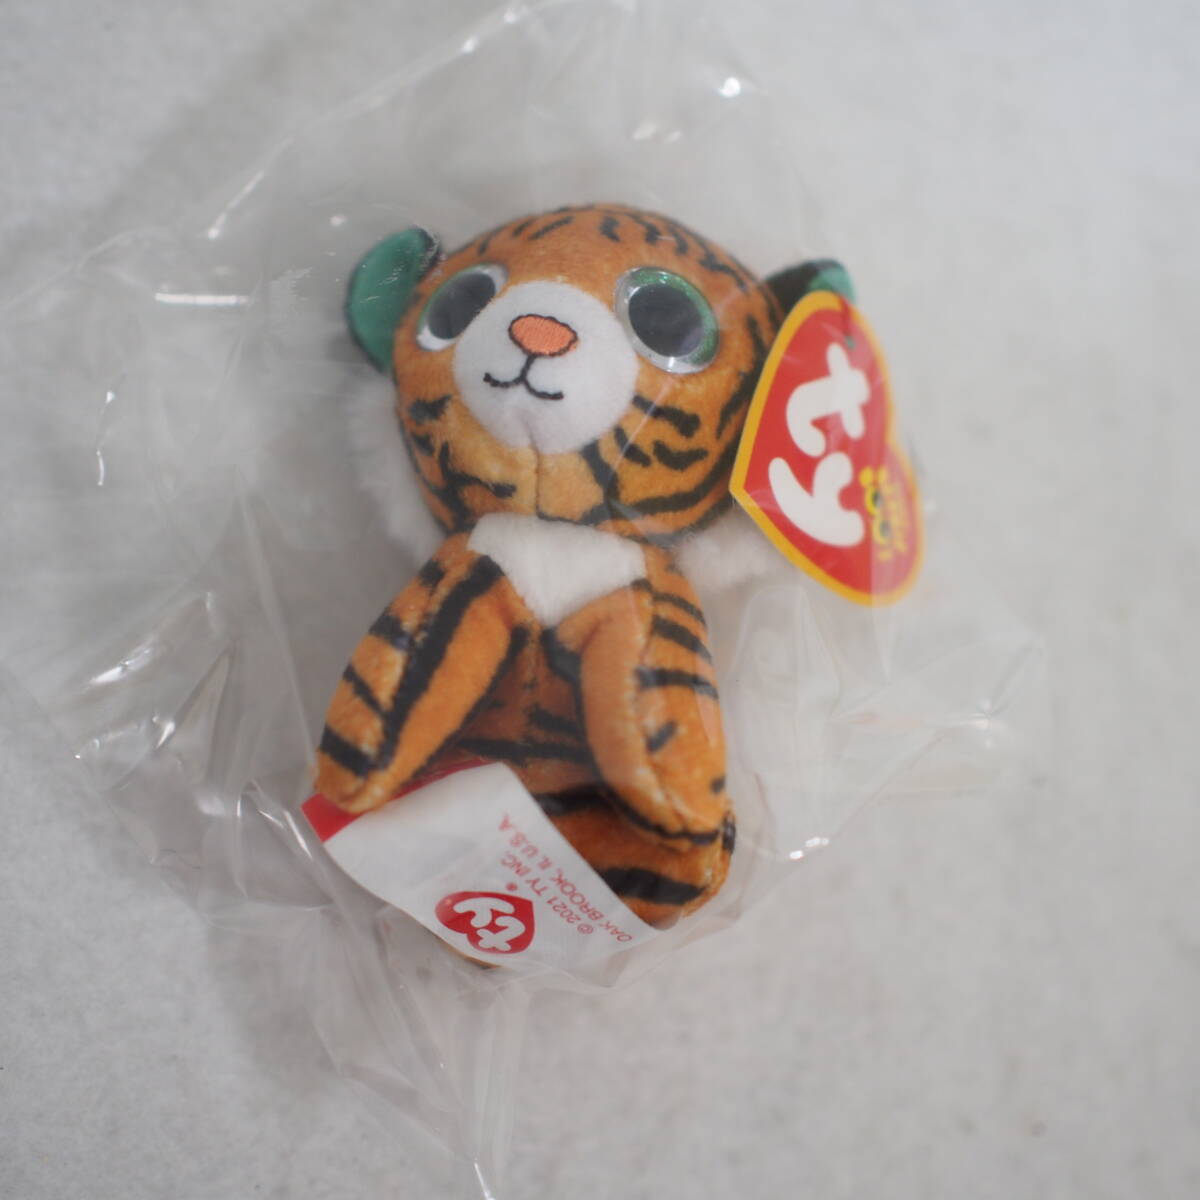  McDonald's happy set TIGGS tiger ... throat ...ty BEANIE soft toy control number 445-17